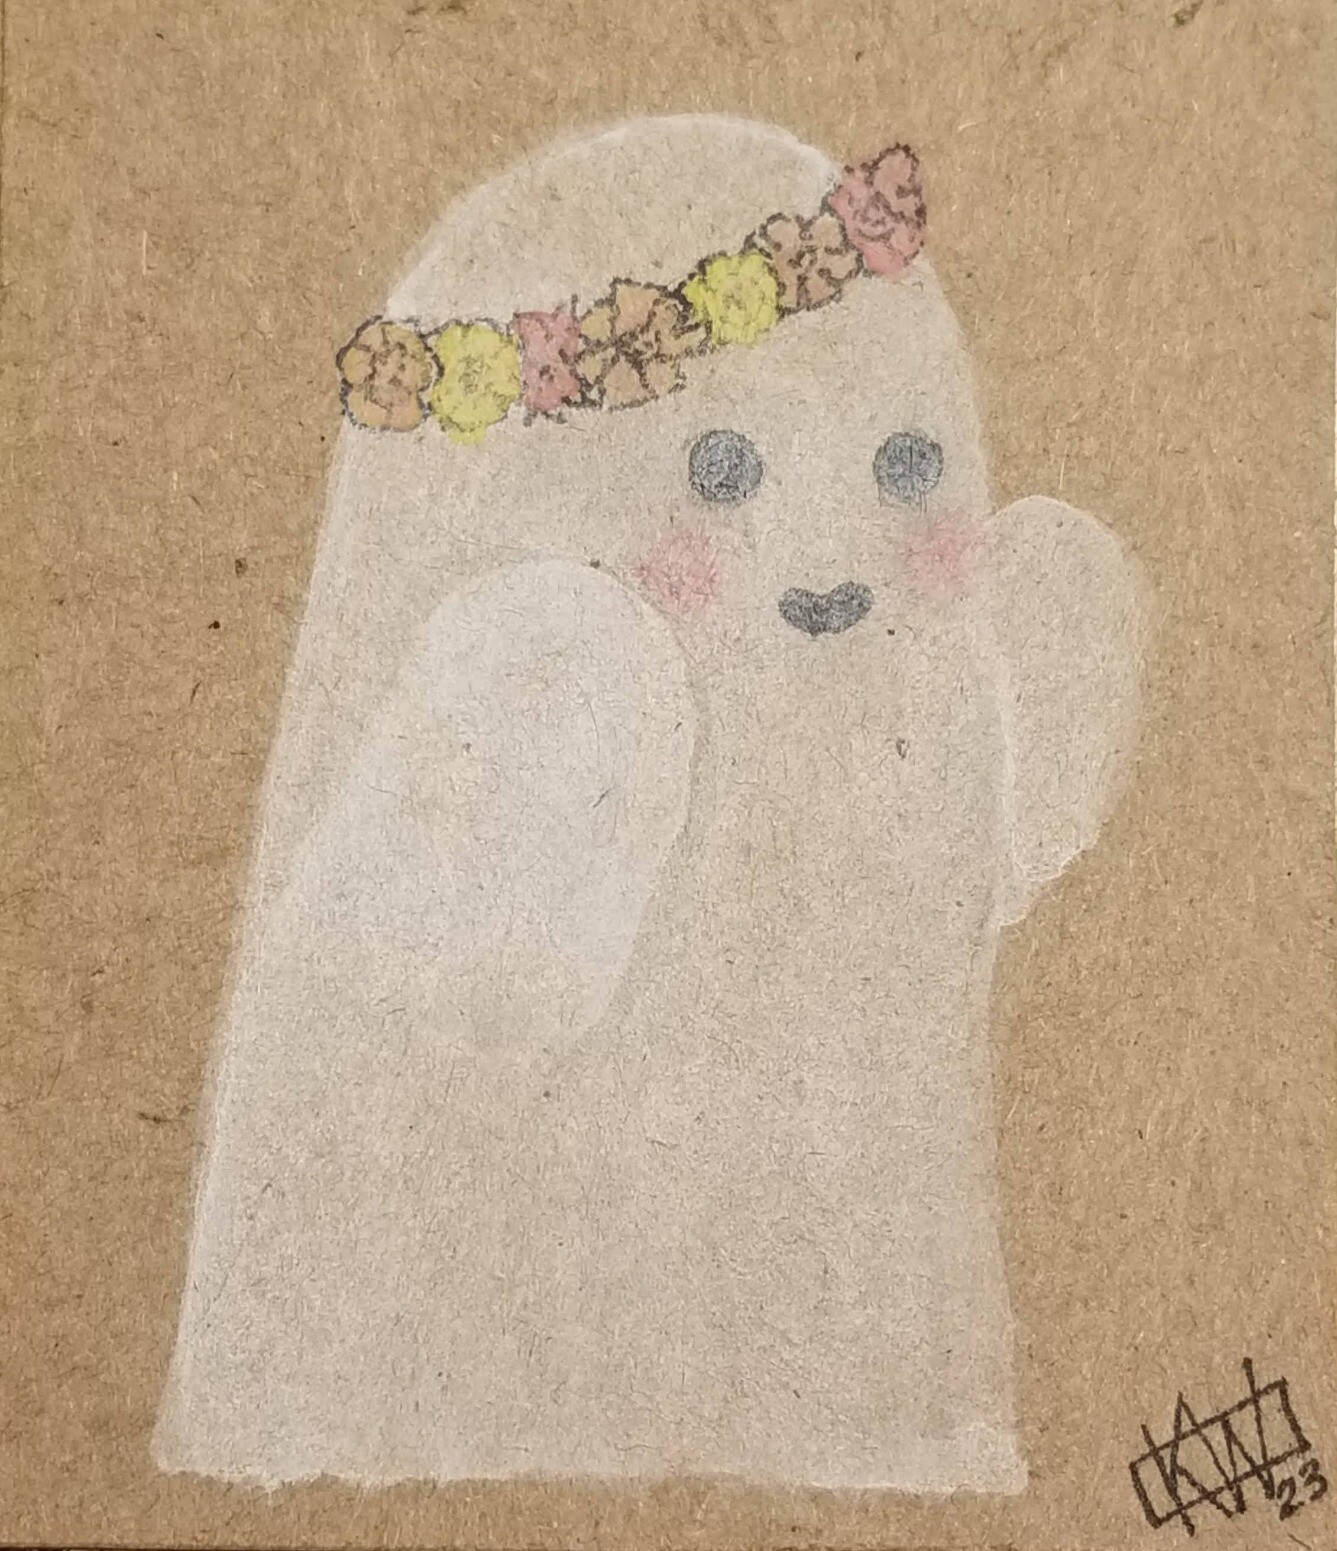 Watercolor & ink on brown cardboard. A smiling, blushing ghost is wearing a flower crown.